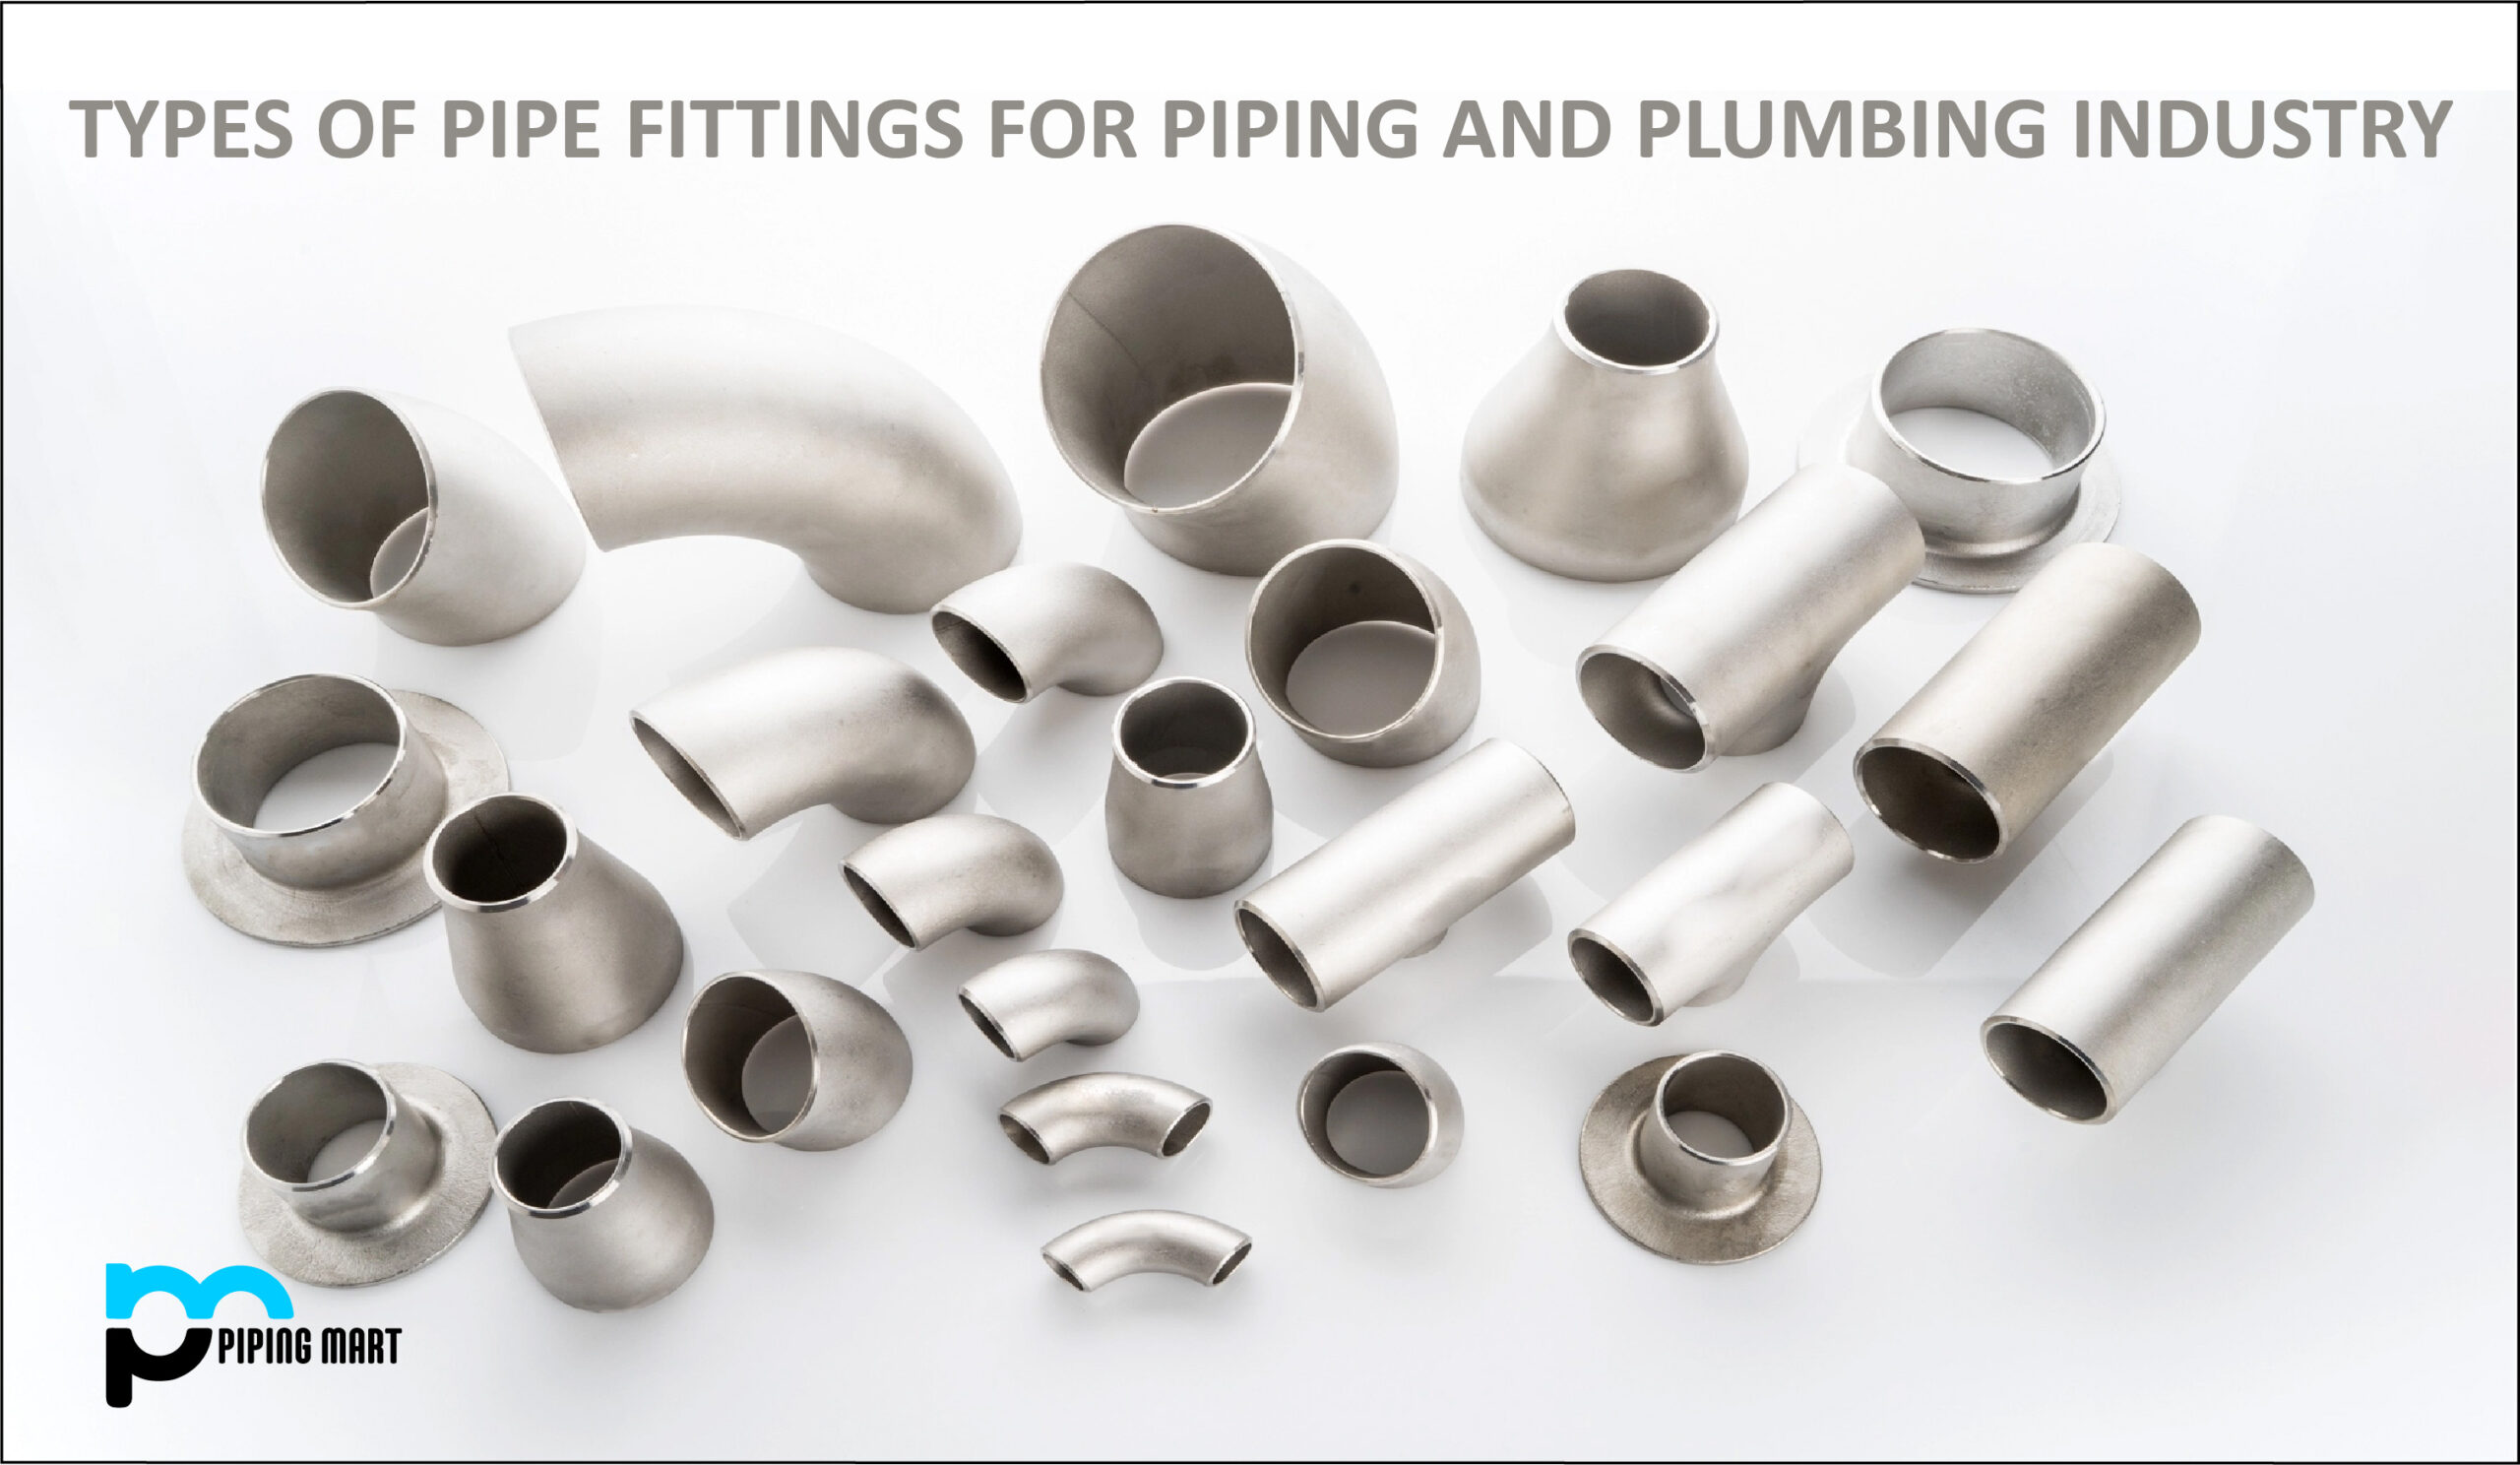  Close-up of various types of pipes, including copper, PVC, and PEX, showcasing different pipe materials used in plumbing.